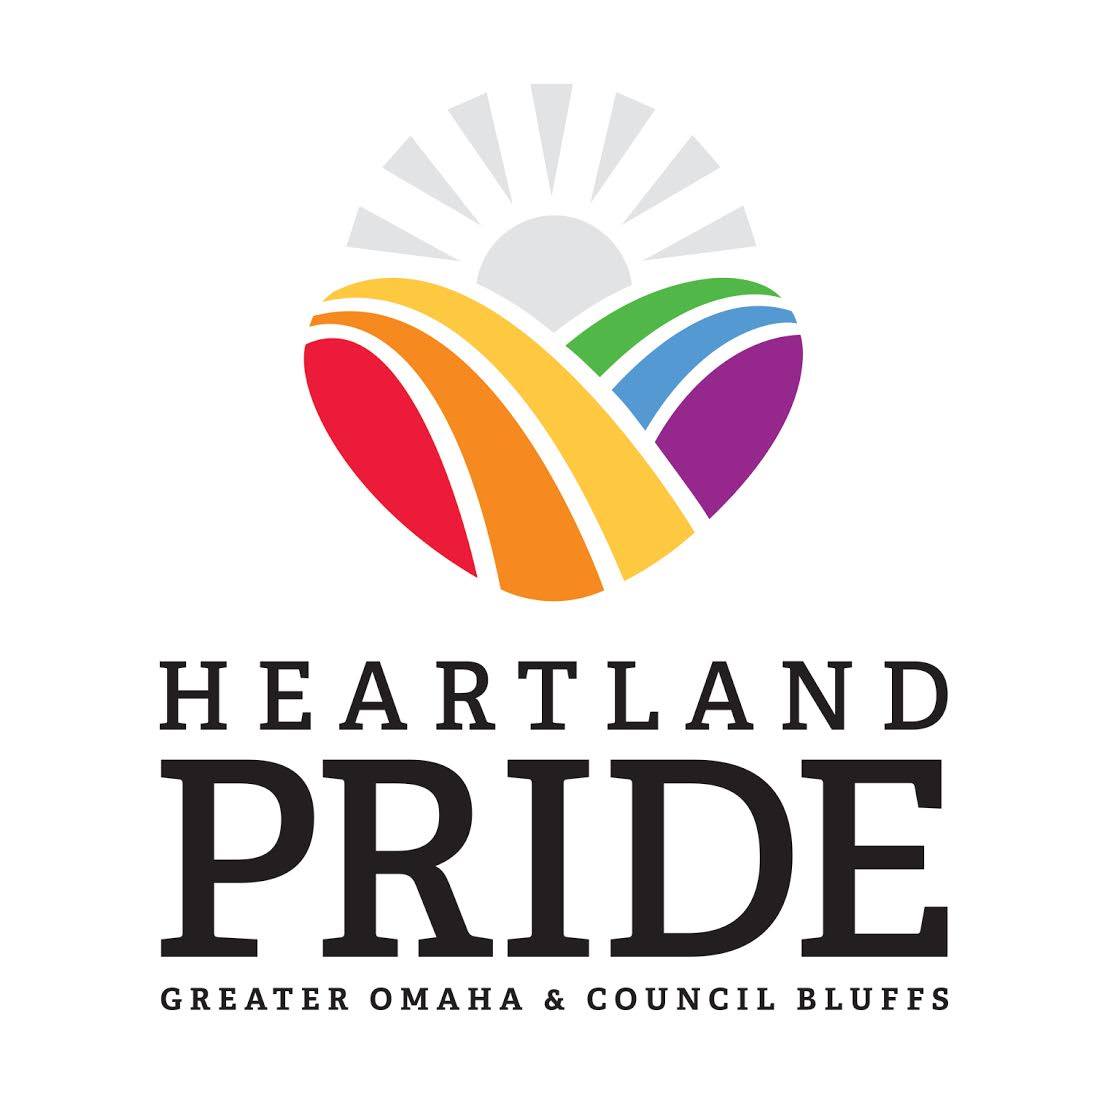 a white background that has a logo of a grey sun and hills that looks like rainbows; underneath says "Heartland Pride Greater Omaha and Council Bluffs"